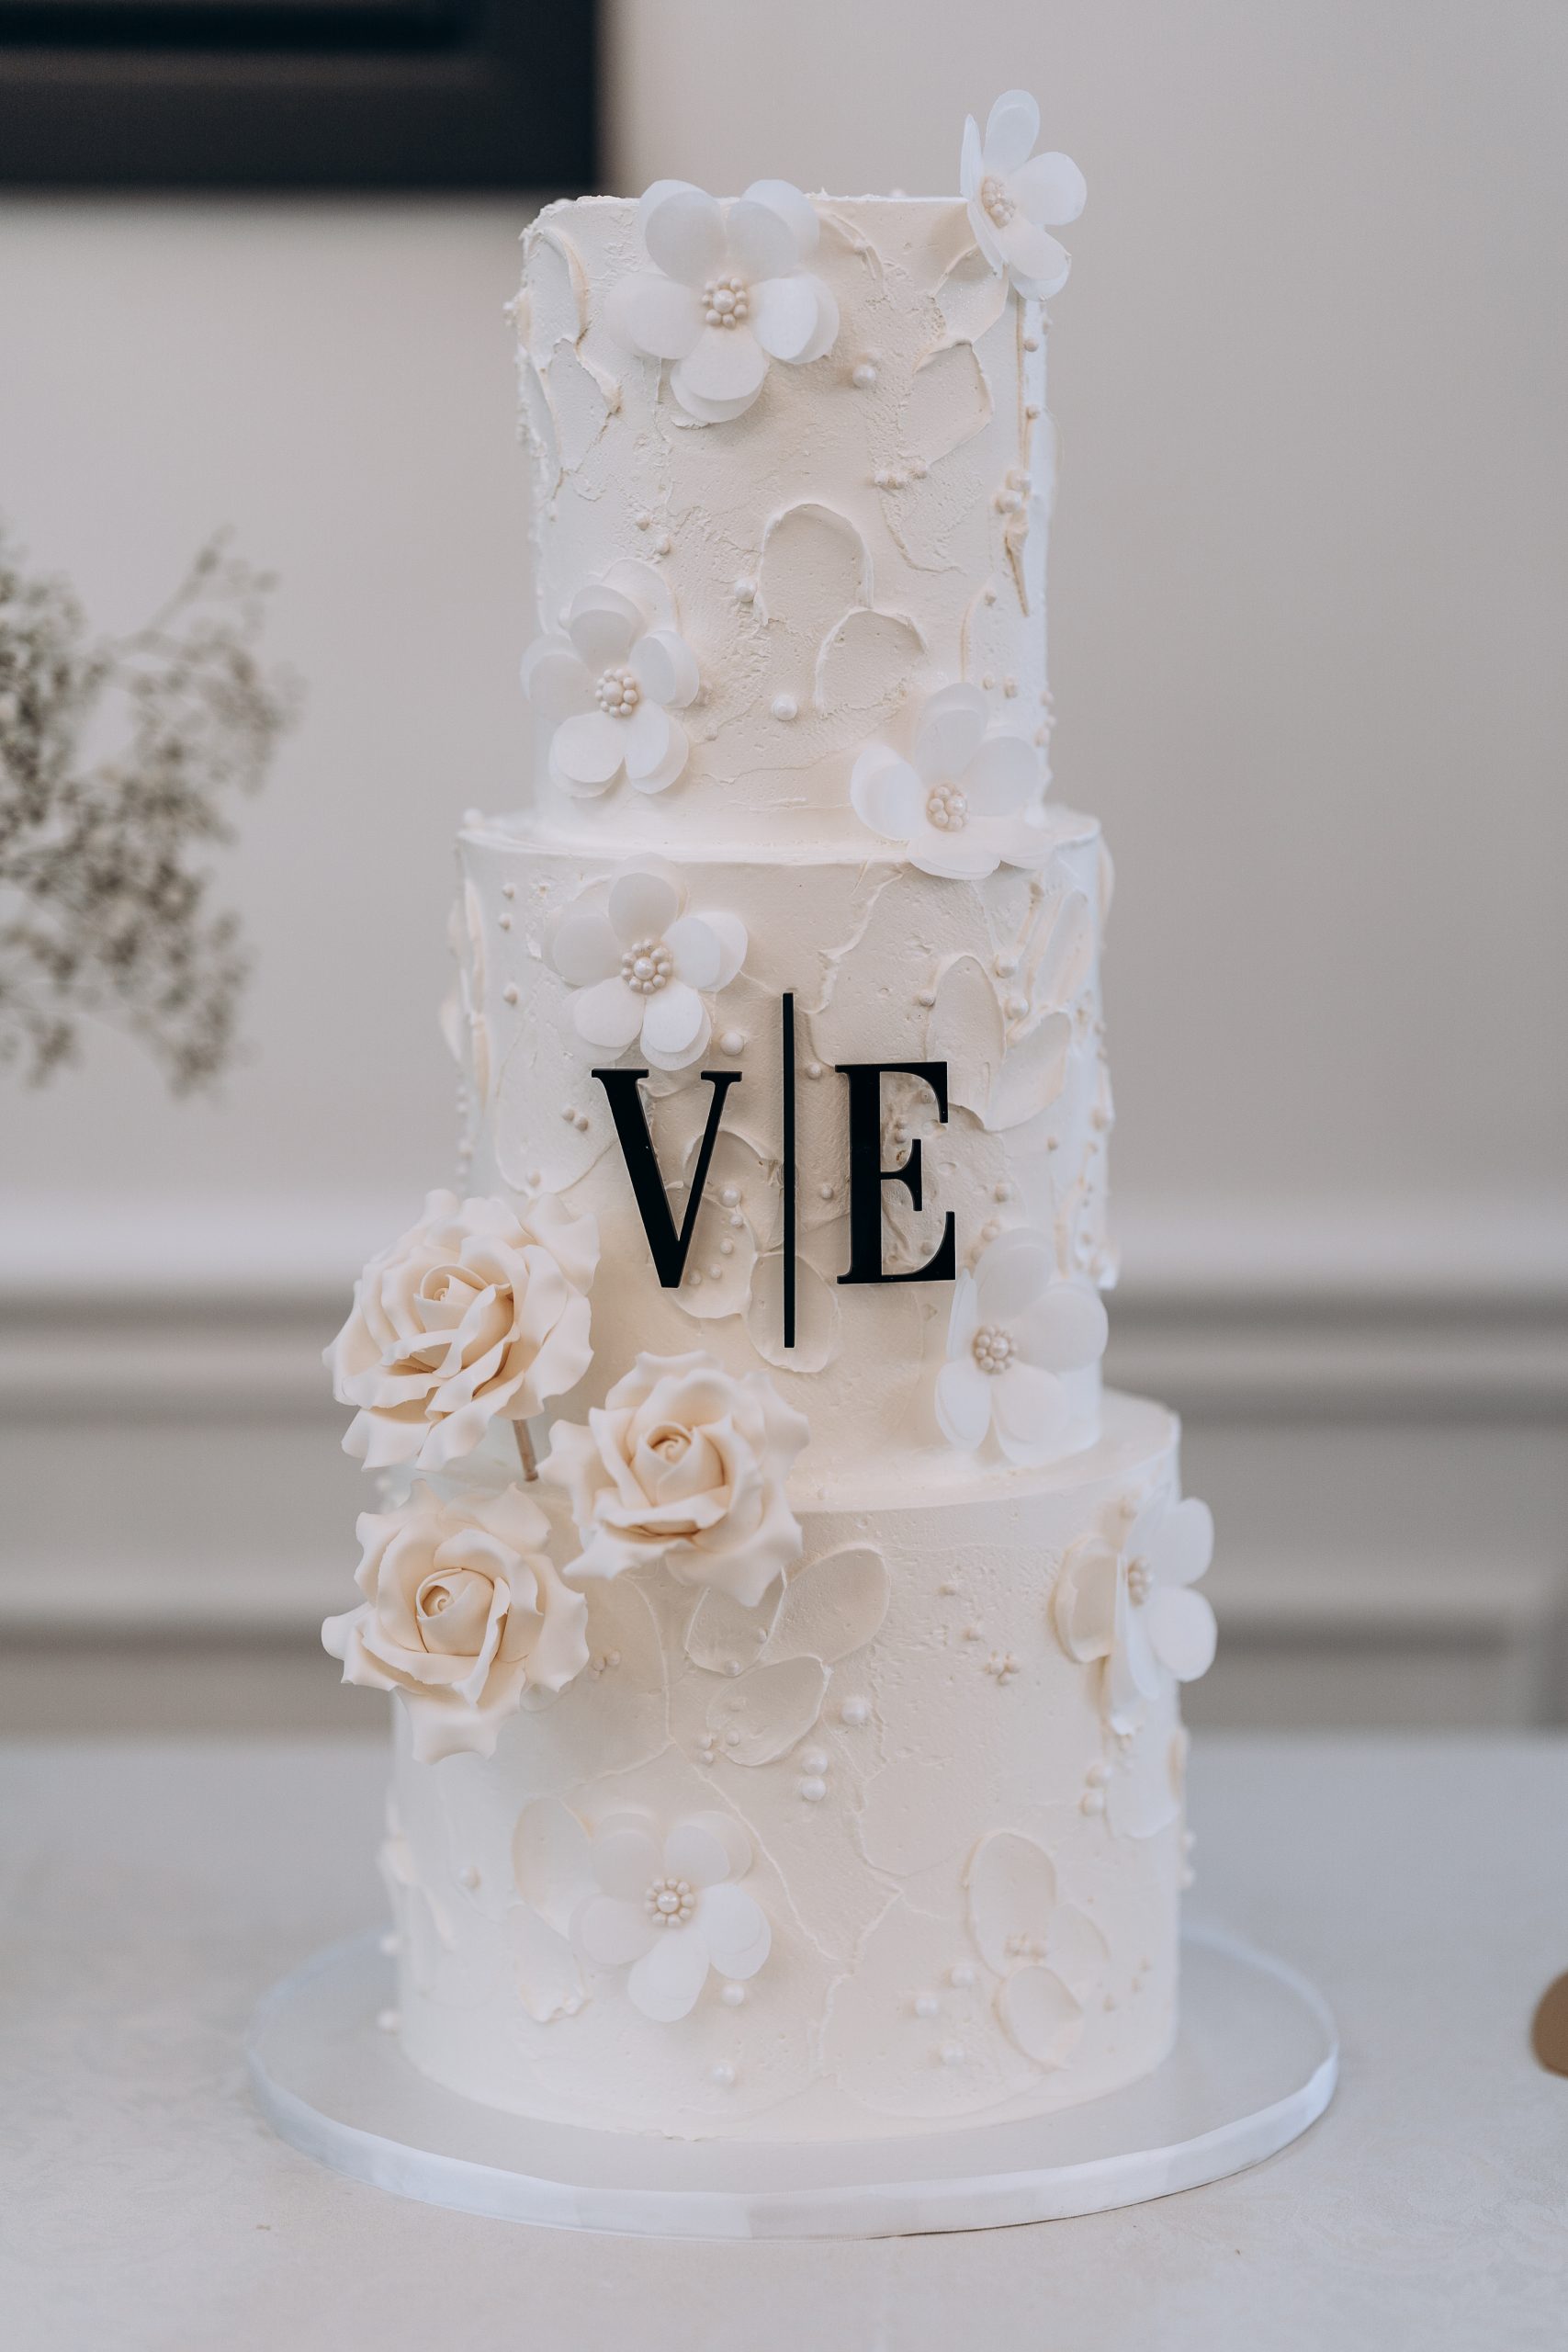 detail image of a wedding cake with the bride and grooms initials on it